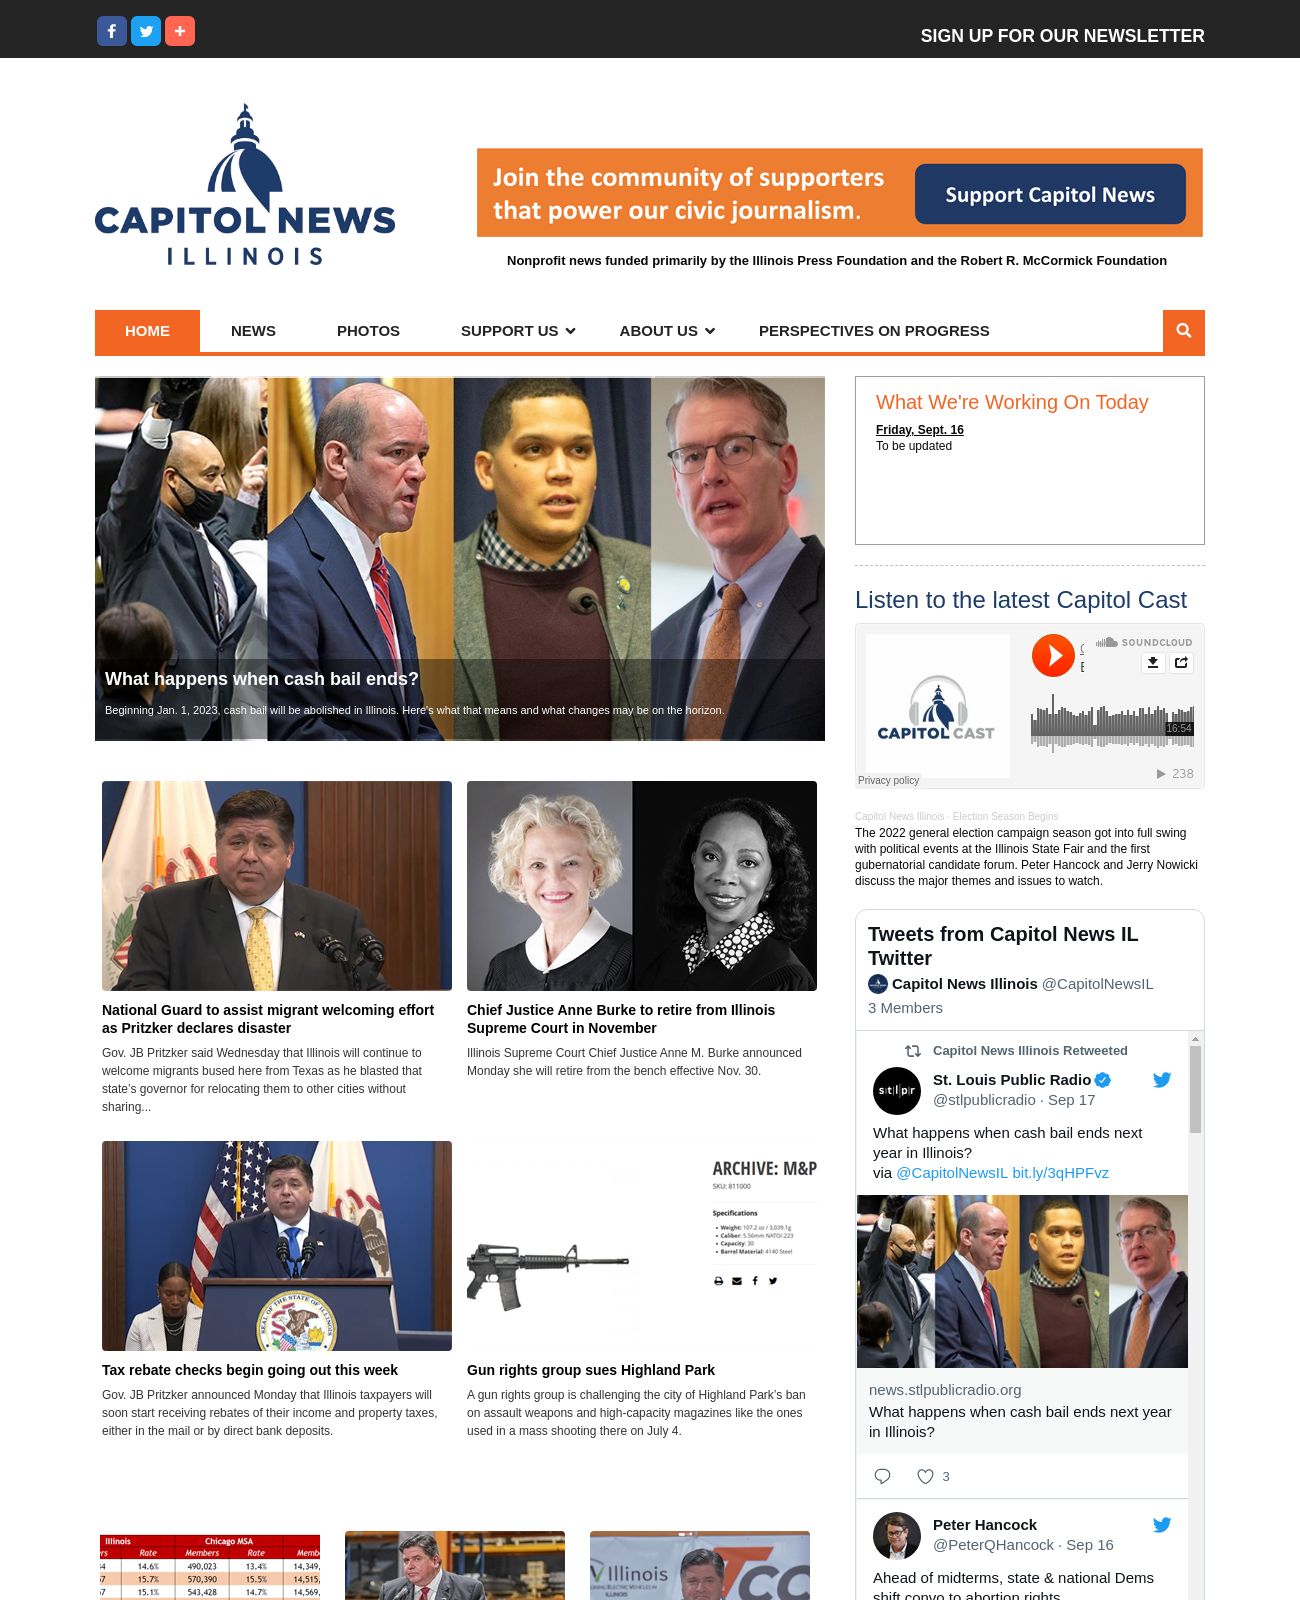 Capitol News Illinois at 2022-09-18 17:51:30-05:00 local time